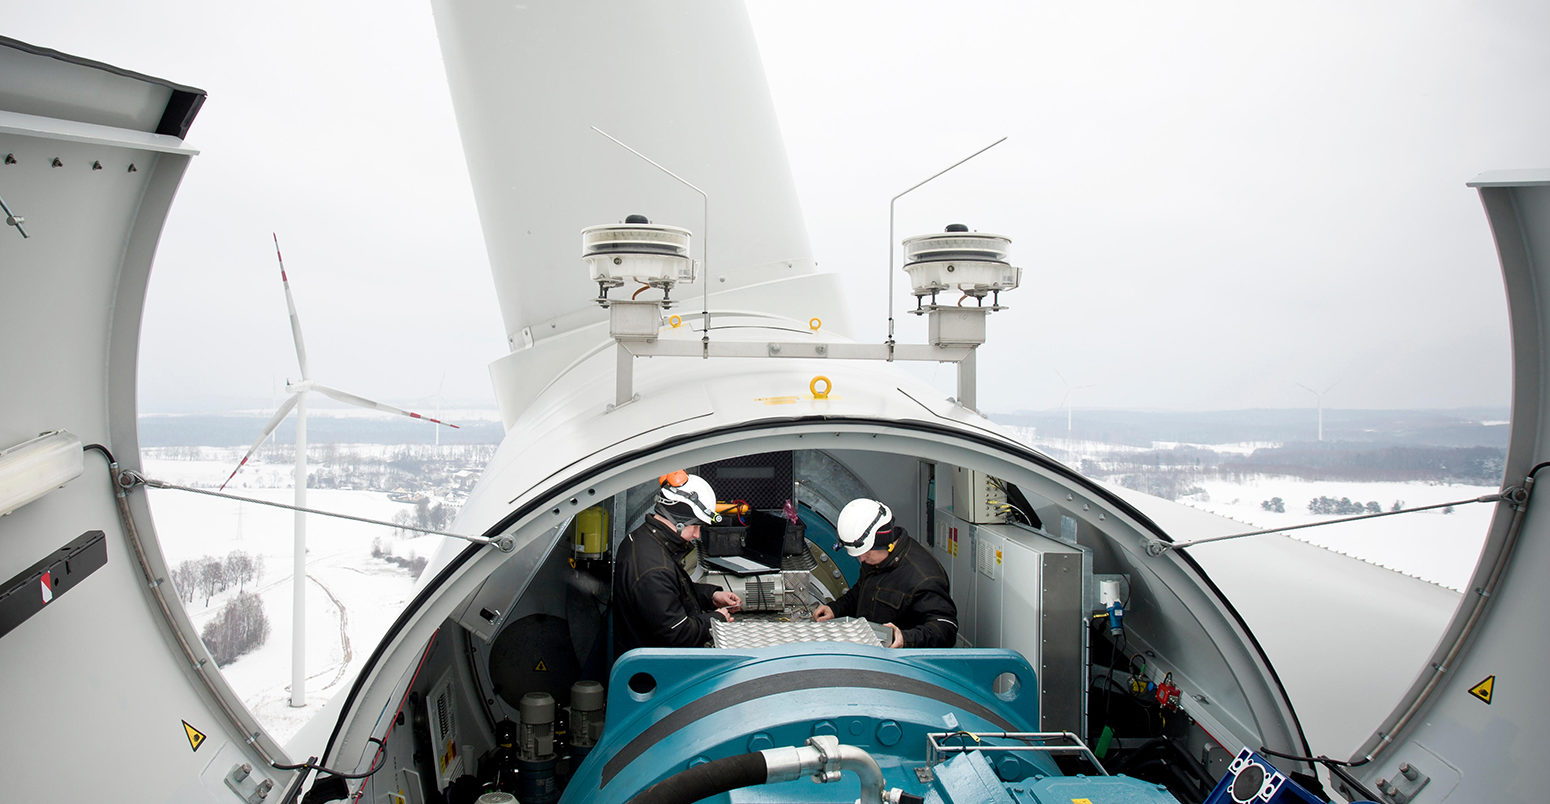 EM6TE7 Two maintenace men work on a wind turbine in northern Poland near Kobylnica during the winter.